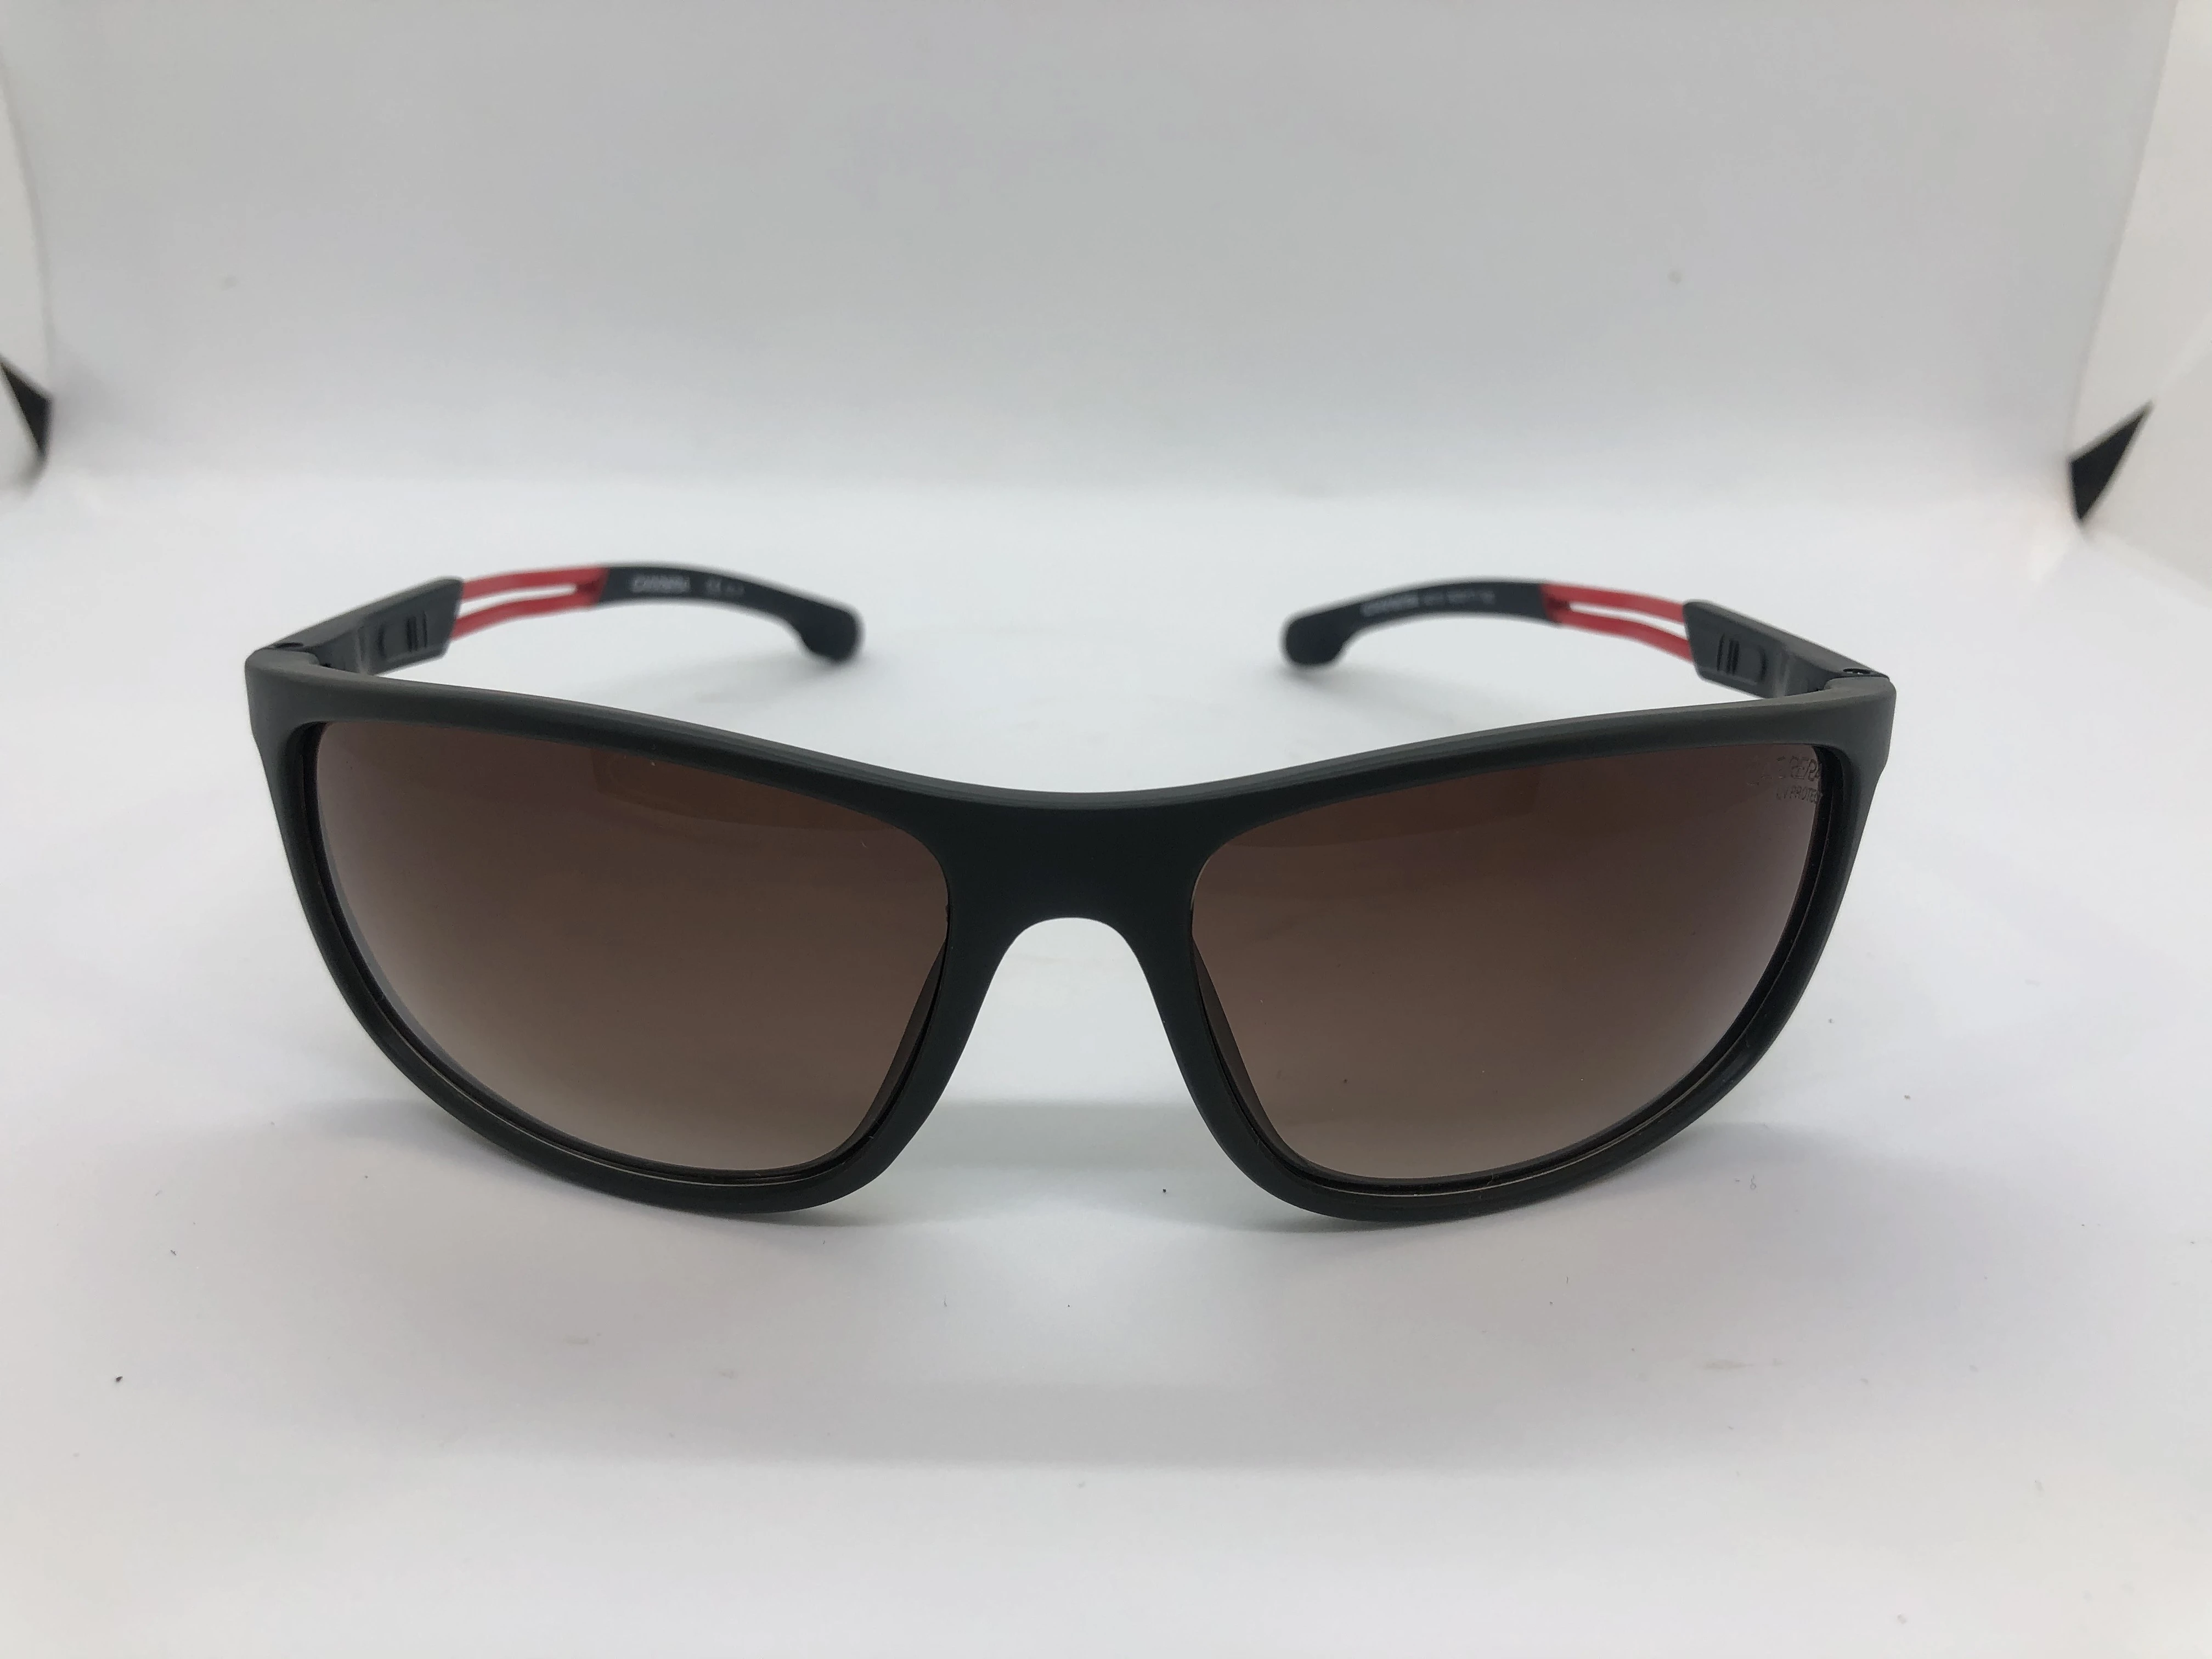 Sunglasses - black from Carrera - with black polycarbonate frame - and hazel lenses - and red * black arms - for men